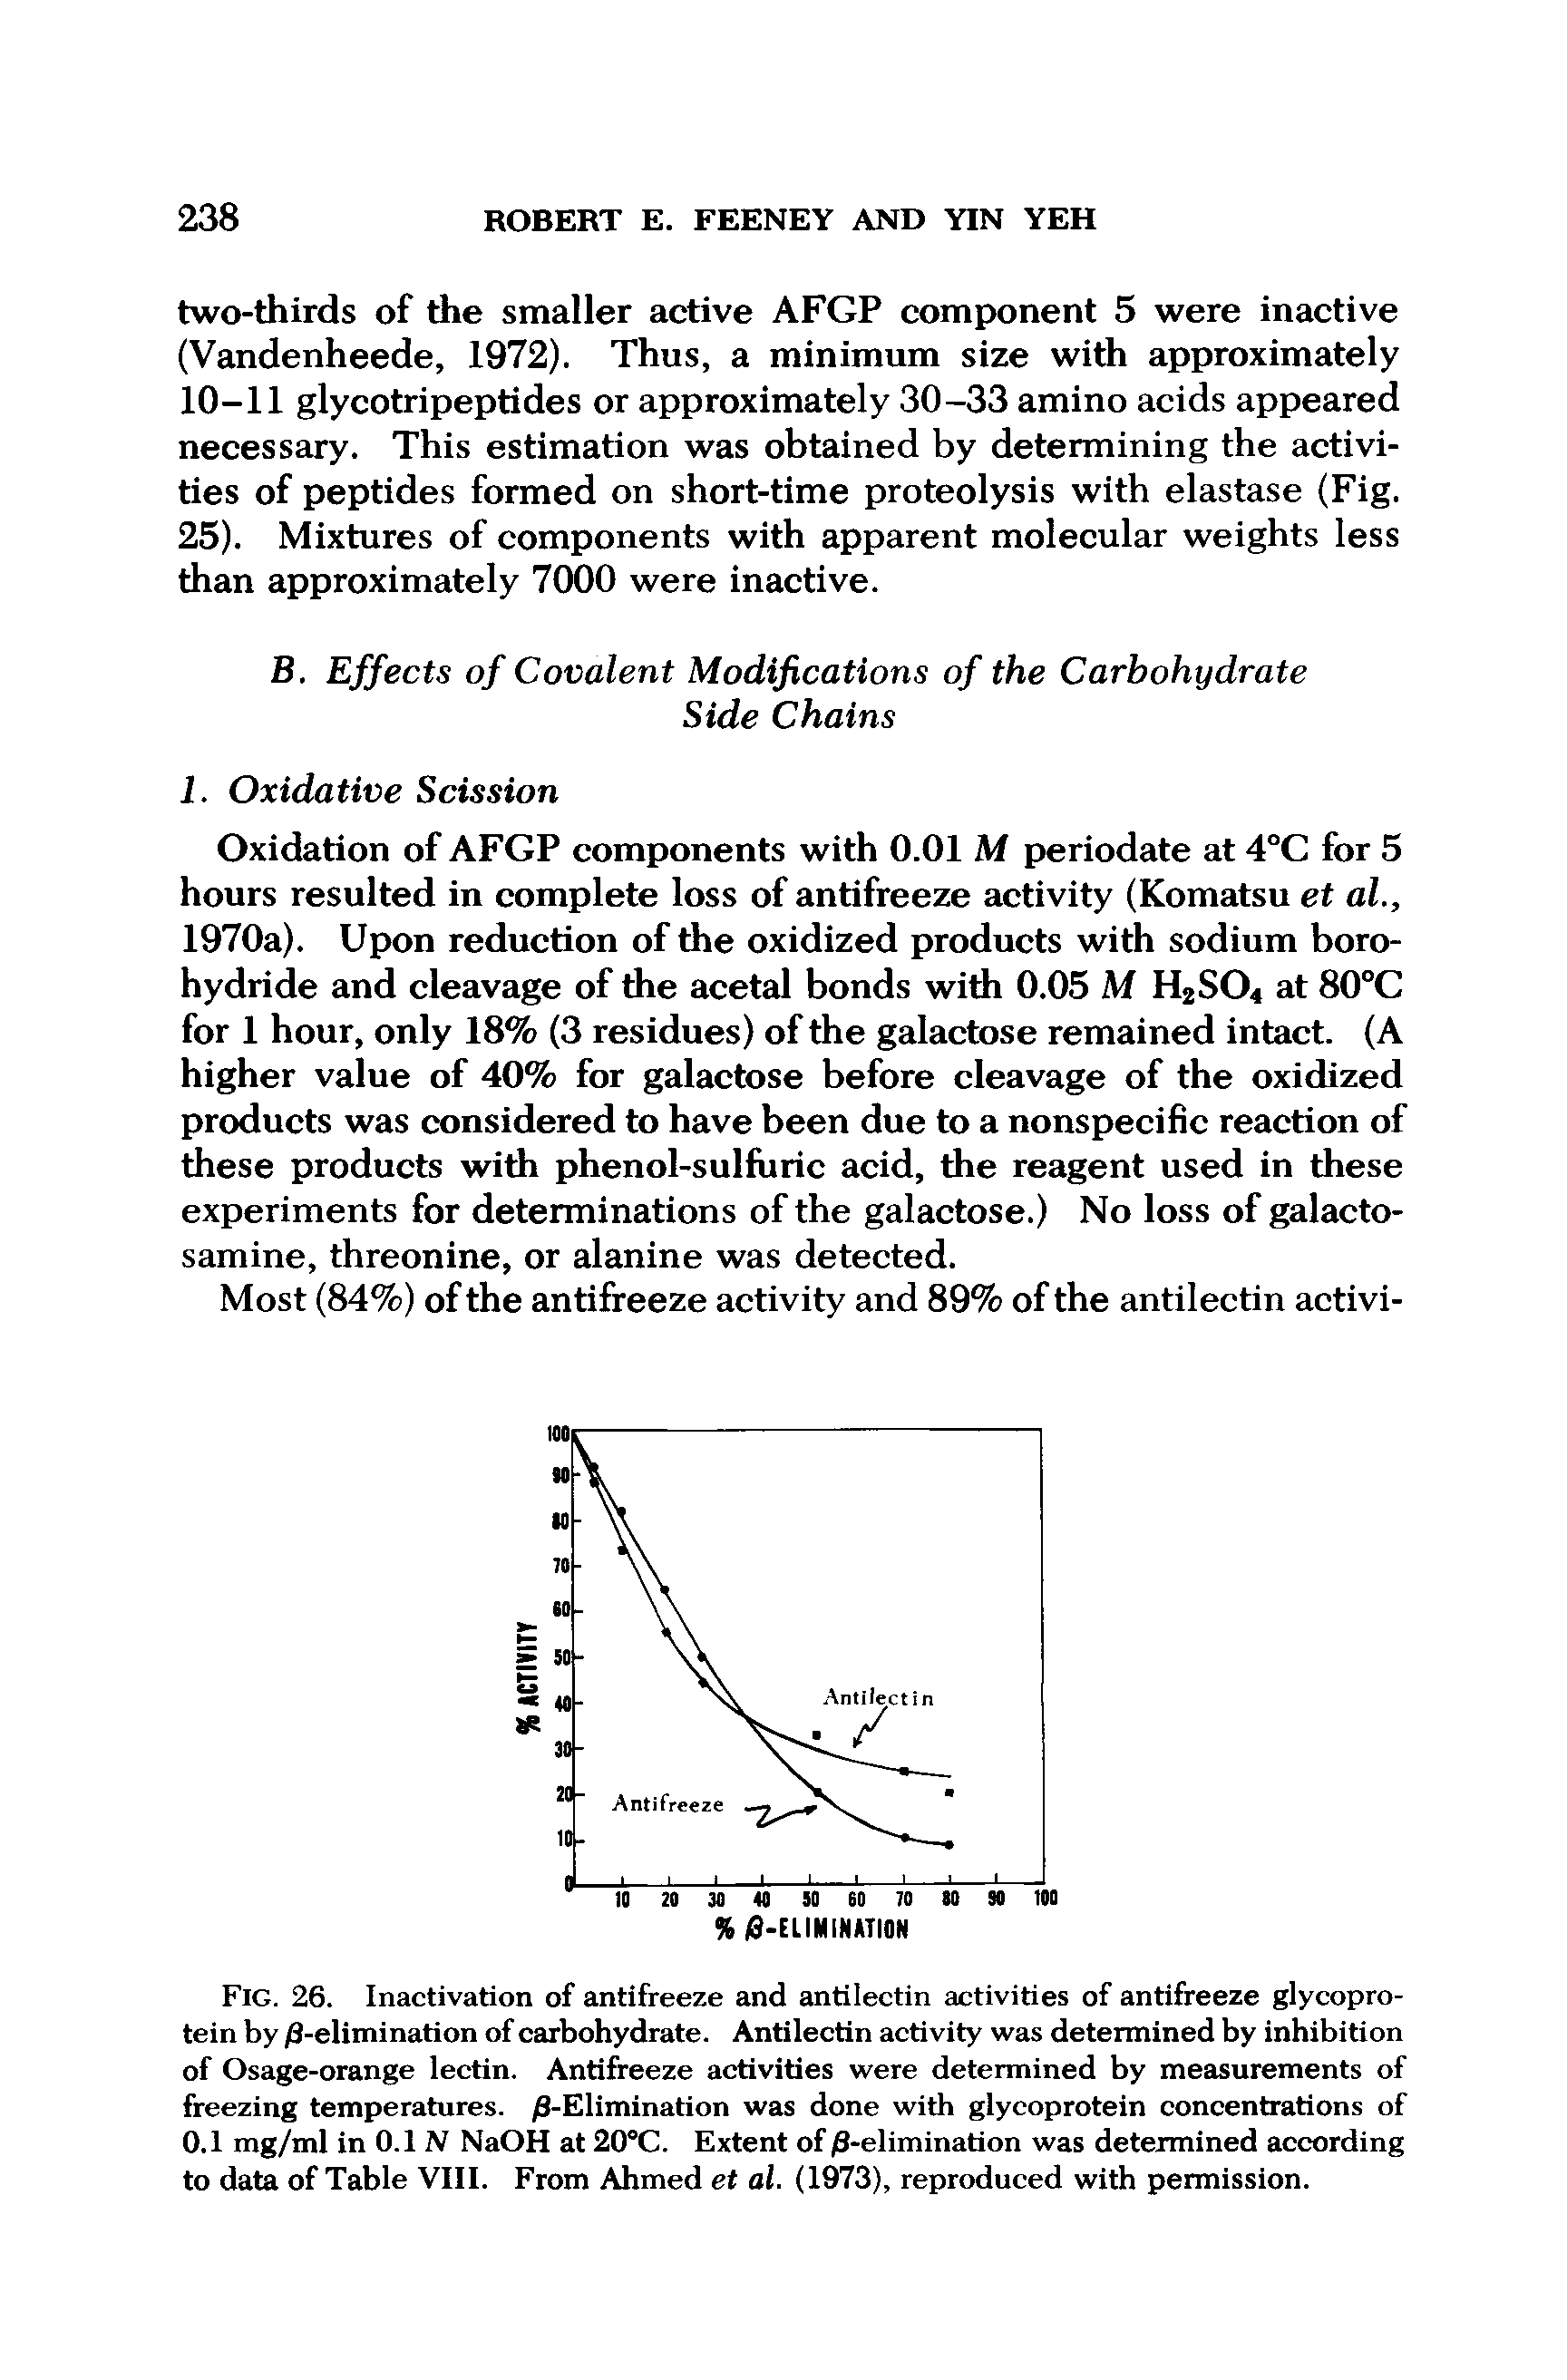 Fig. 26. Inactivation of antifreeze and antilectin activities of antifreeze glycoprotein by /3-elimination of carbohydrate. Antilectin activity was determined by inhibition of Osage-orange lectin. Antifreeze activities were determined by measurements of freezing temperatures. /3-Elimination was done with glycoprotein concentrations of 0.1 mg/ml in 0.1 N NaOH at 20°C. Extent of/3-elimination was determined according to data of Table VIII. From Ahmed et al. (1973), reproduced with permission.